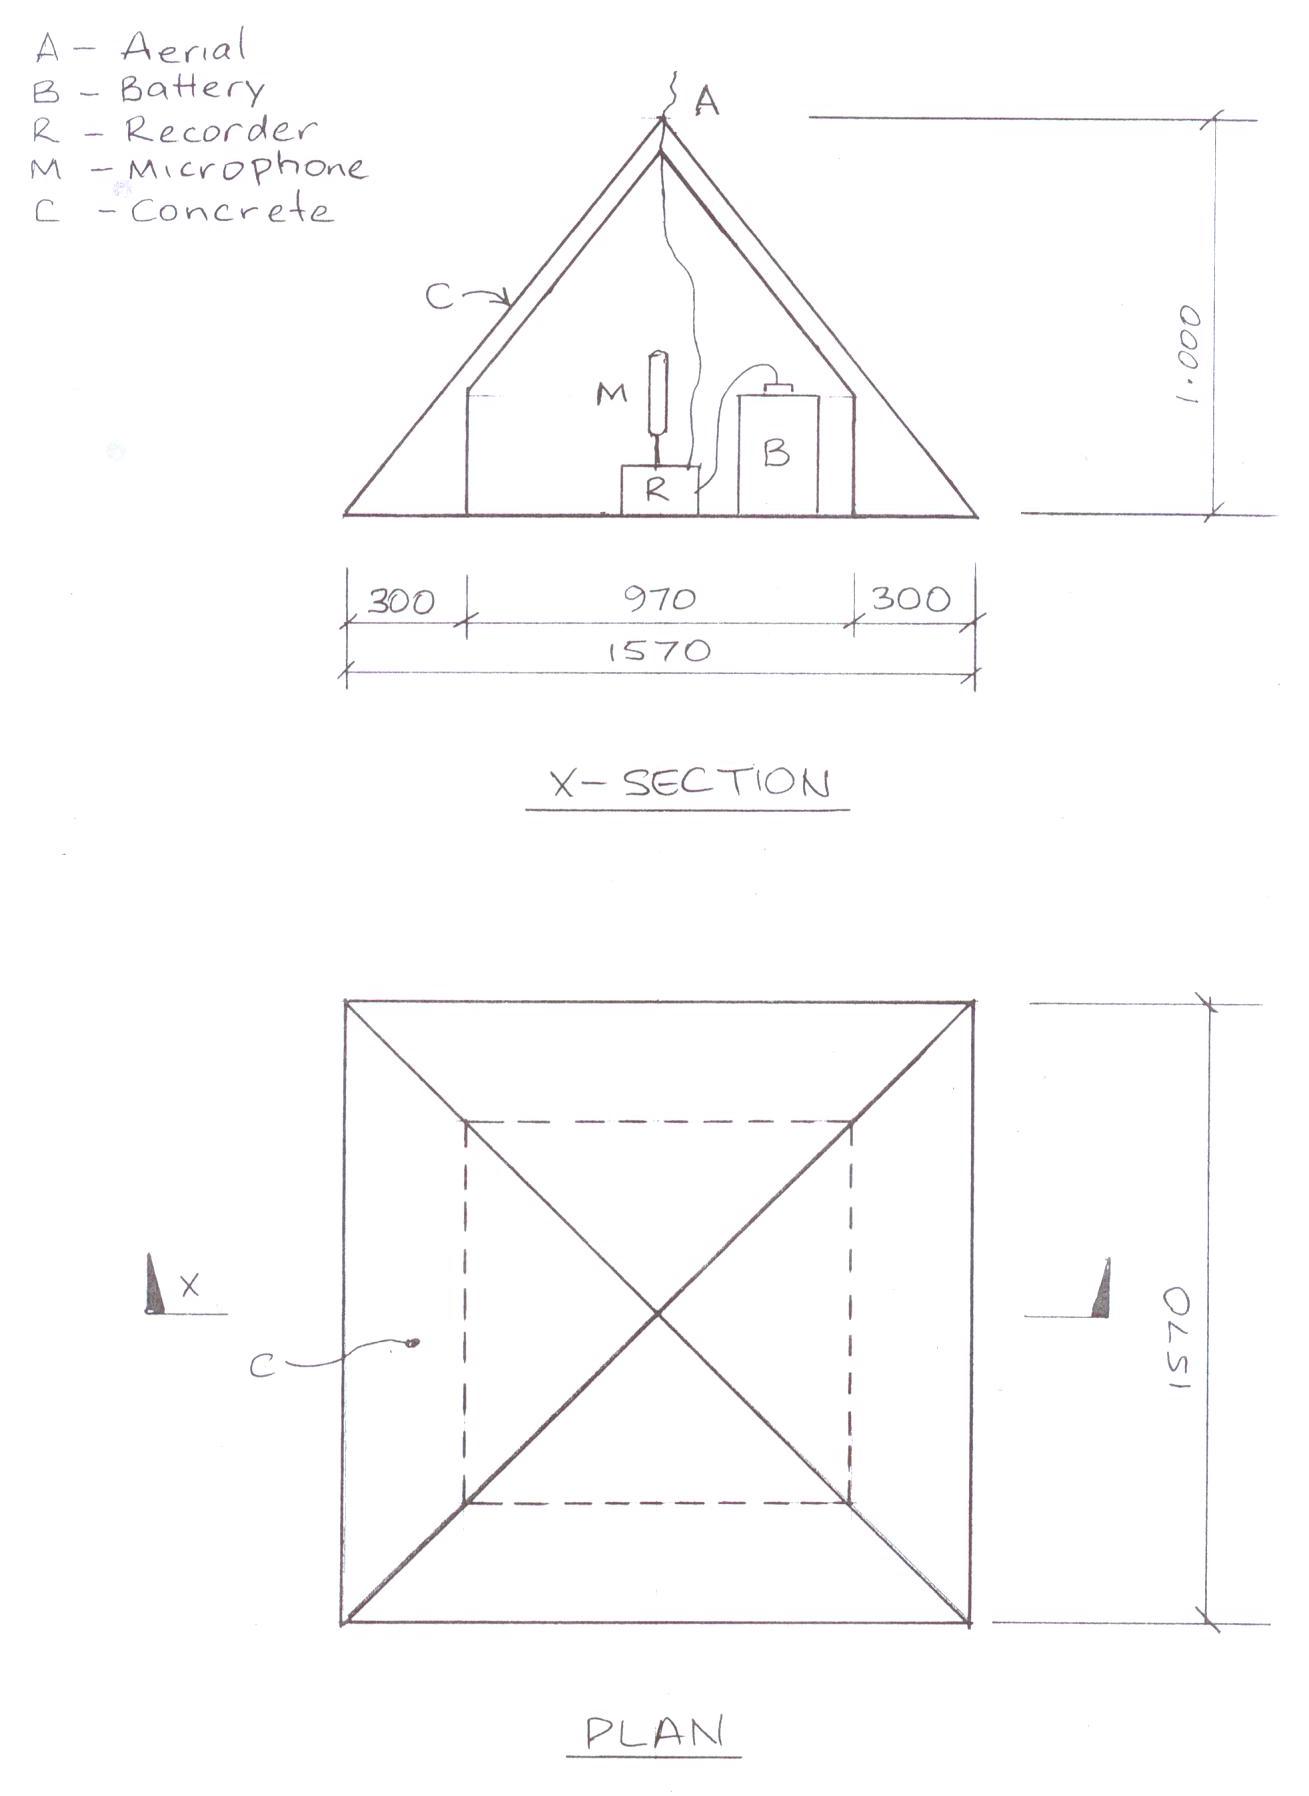 Proposed equipment to install in a Pyramid